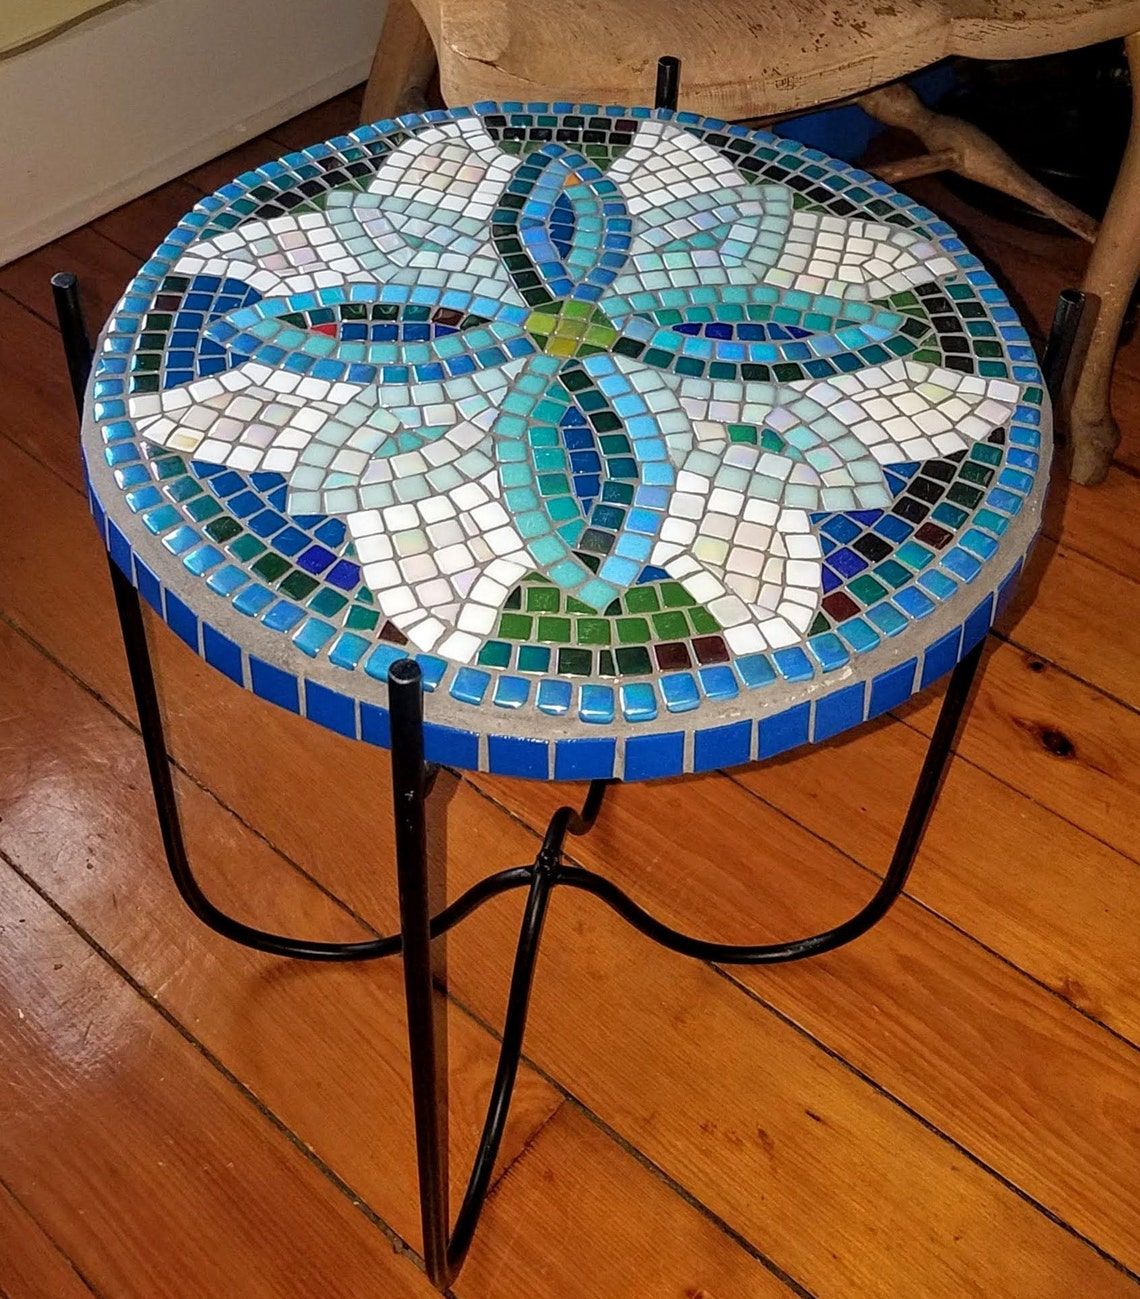 Mosaic Indoor/Outdoor 16 Accent Table | Etsy In Mosaic Outdoor Accent Tables (View 3 of 15)